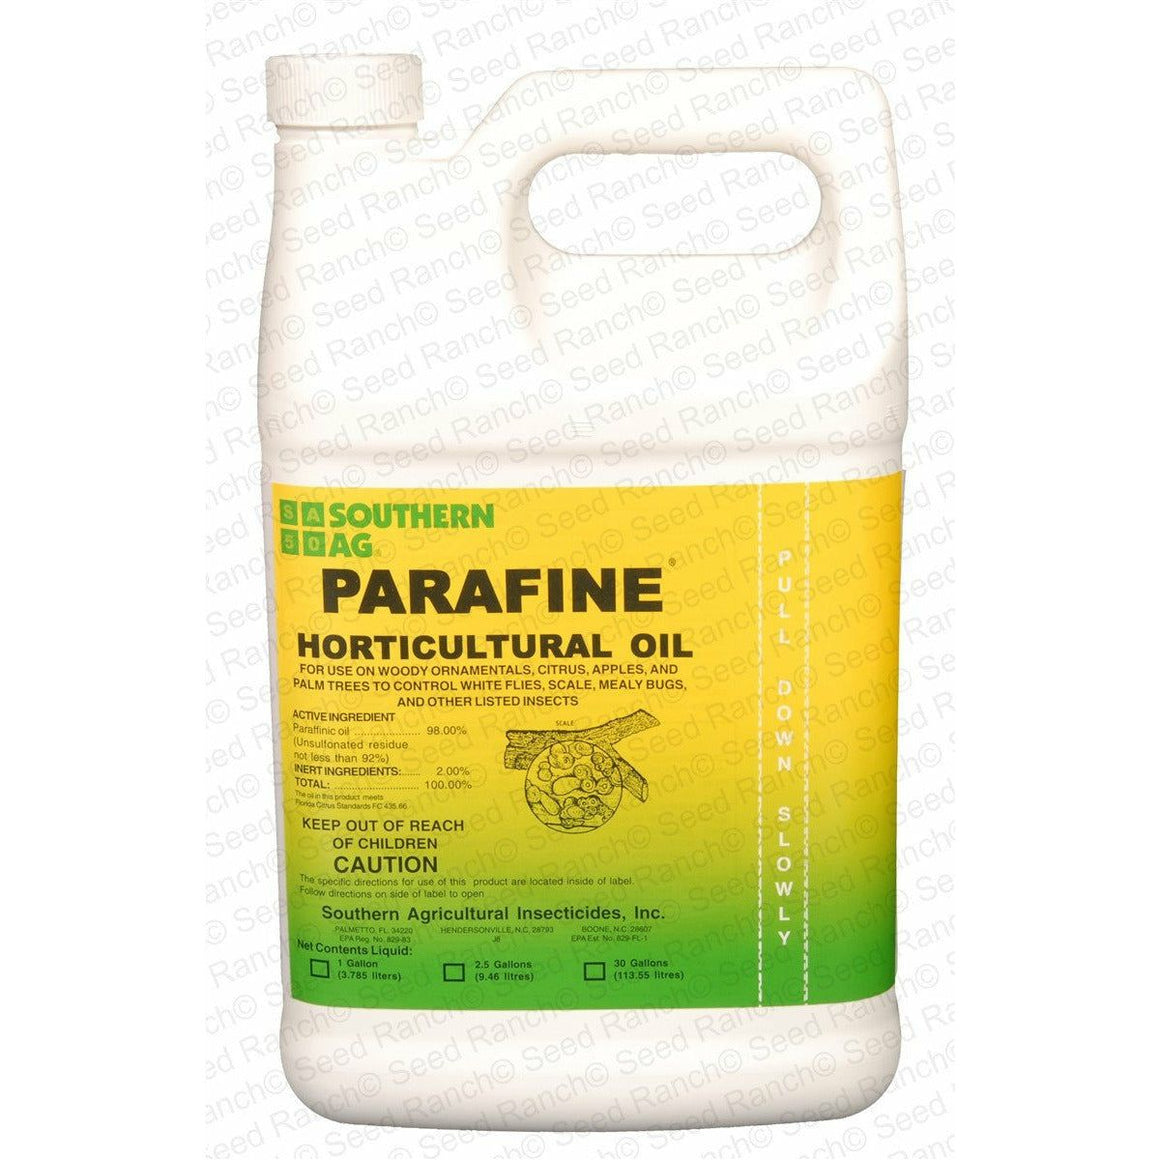 Parafine Horicultural Oil Insecticide - 1 Gallon - Seed World